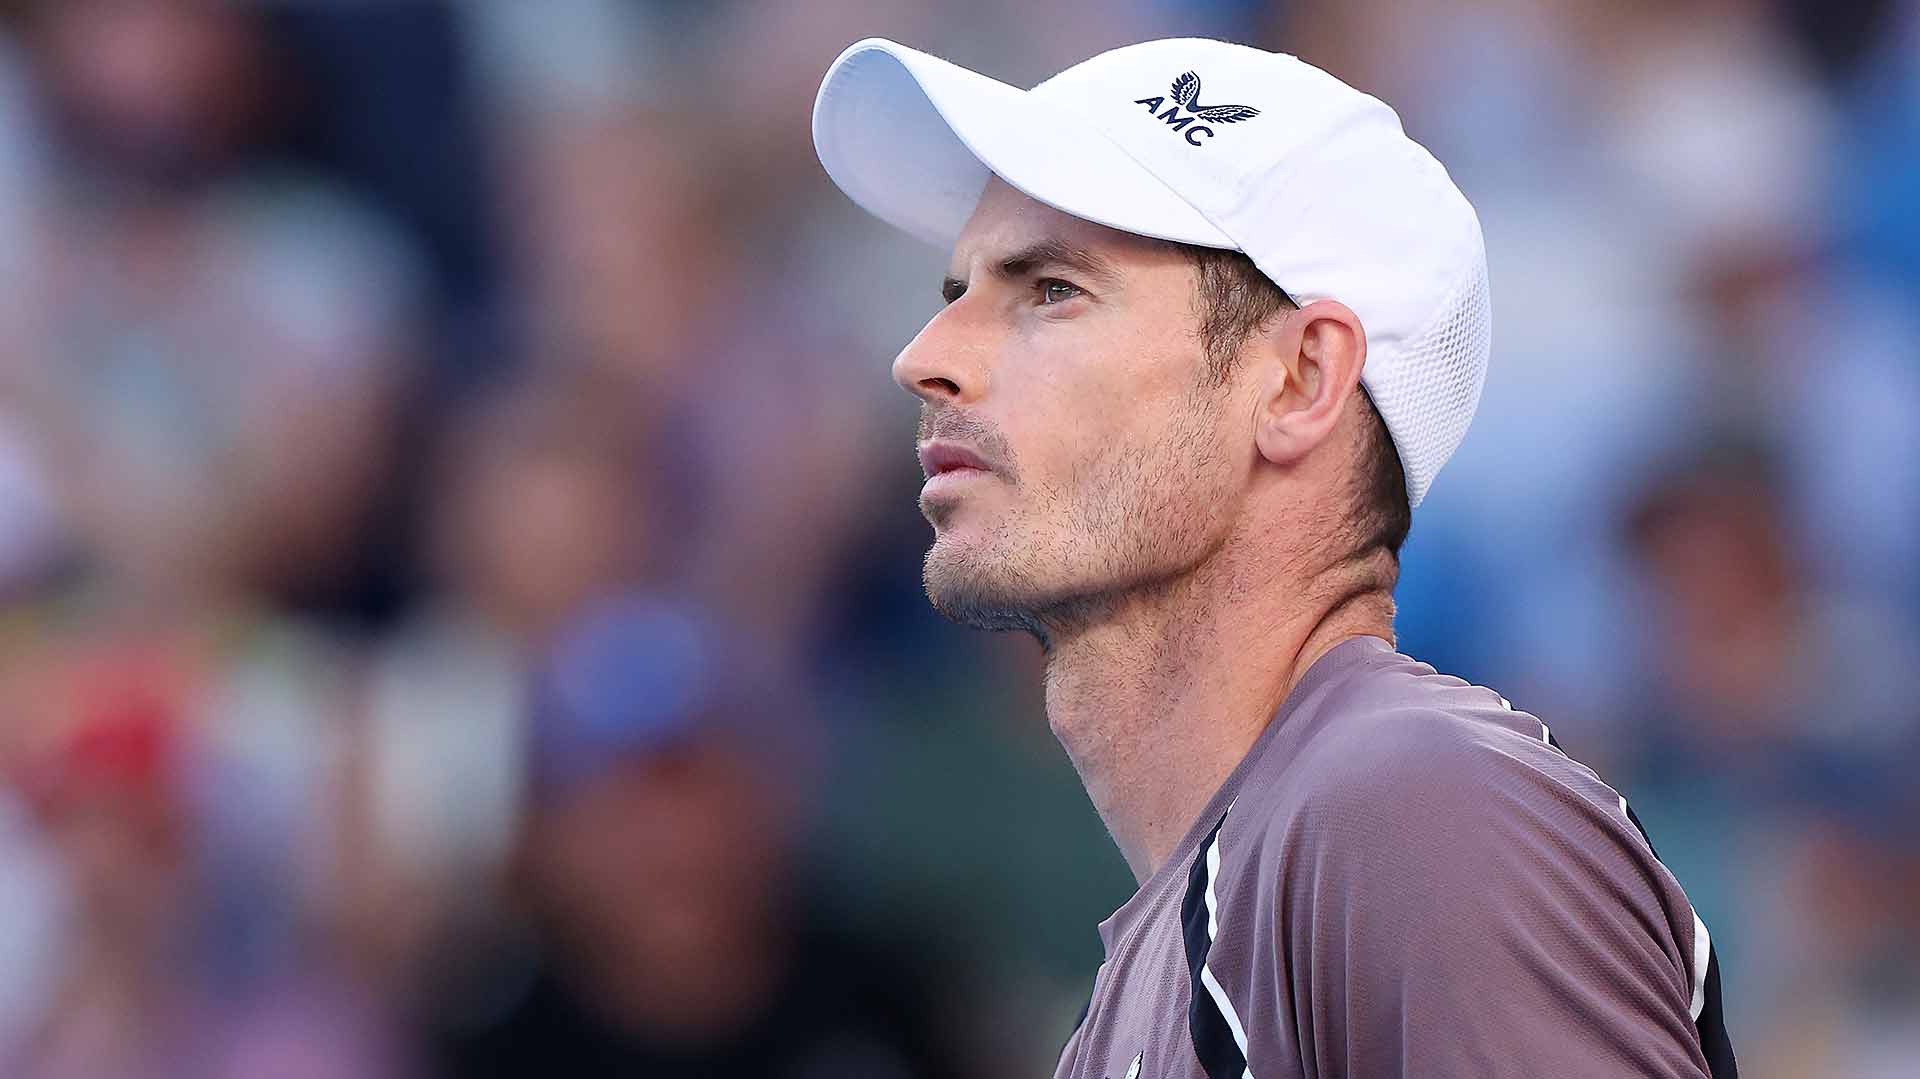 Andy Murray may have made his final appearance at the Australian Open.